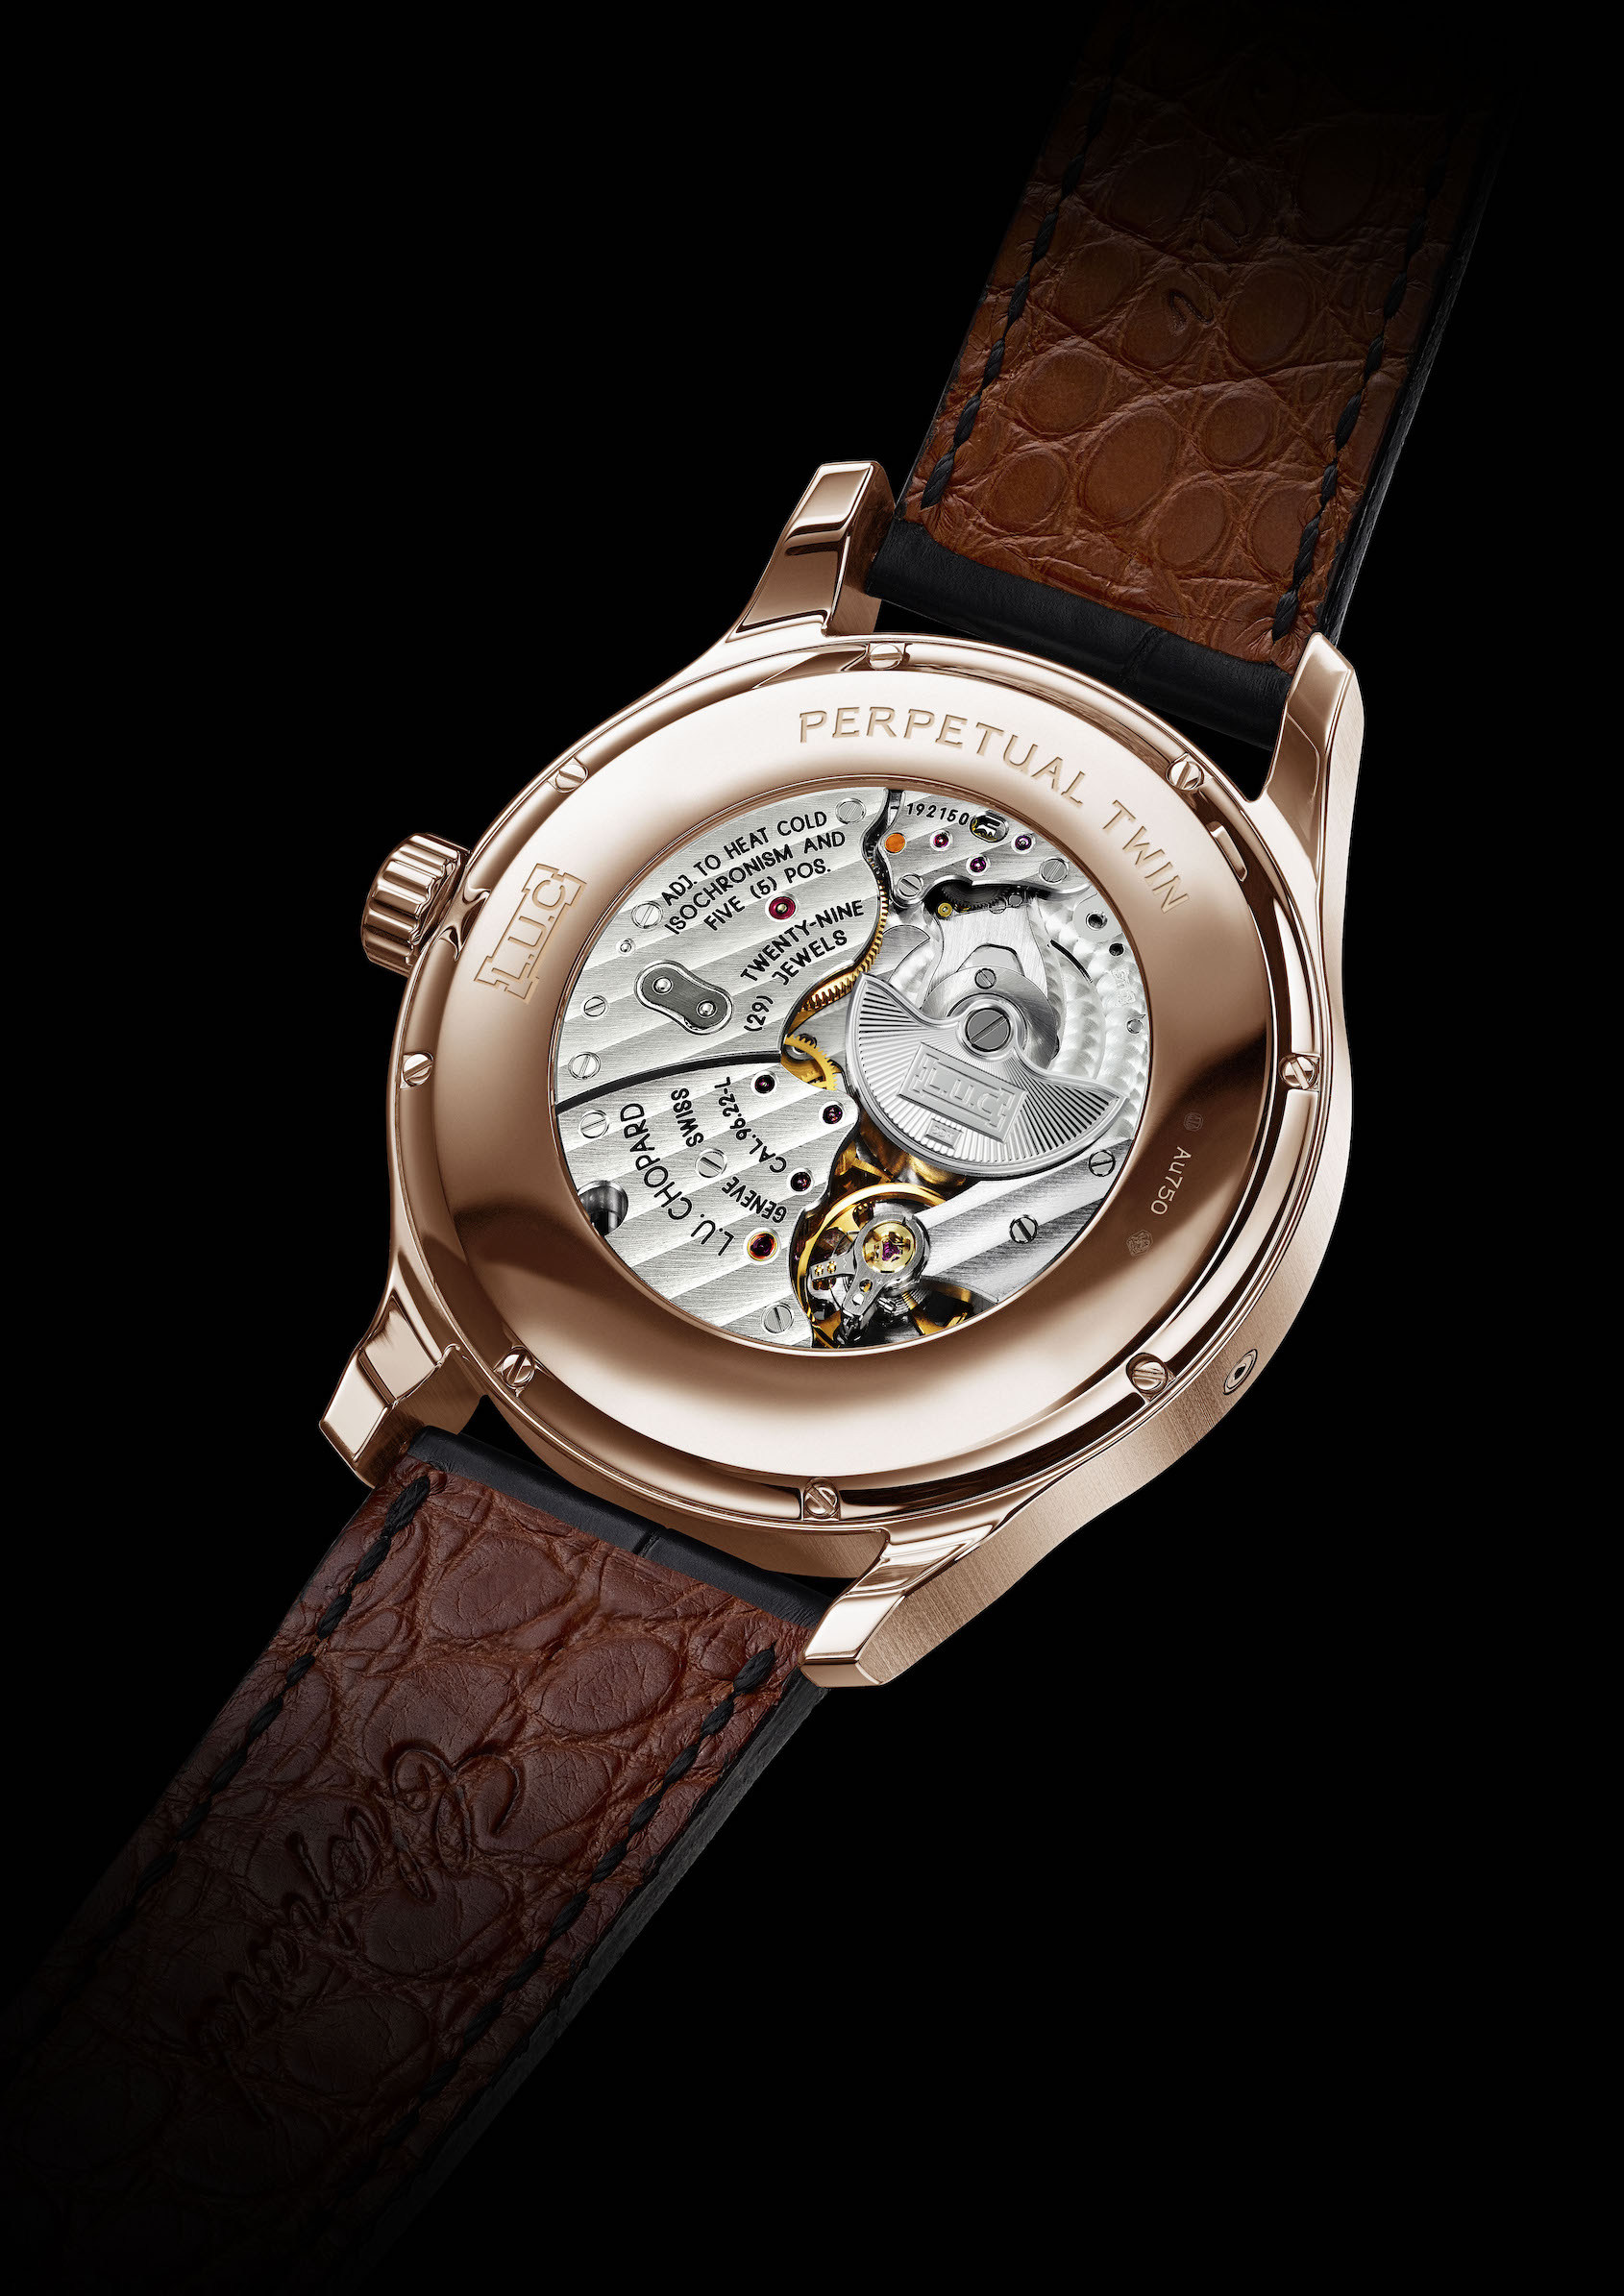 INTRODUCING: The new Chopard Mille Miglia and L.U.C Perpetual Twin 2020 ...